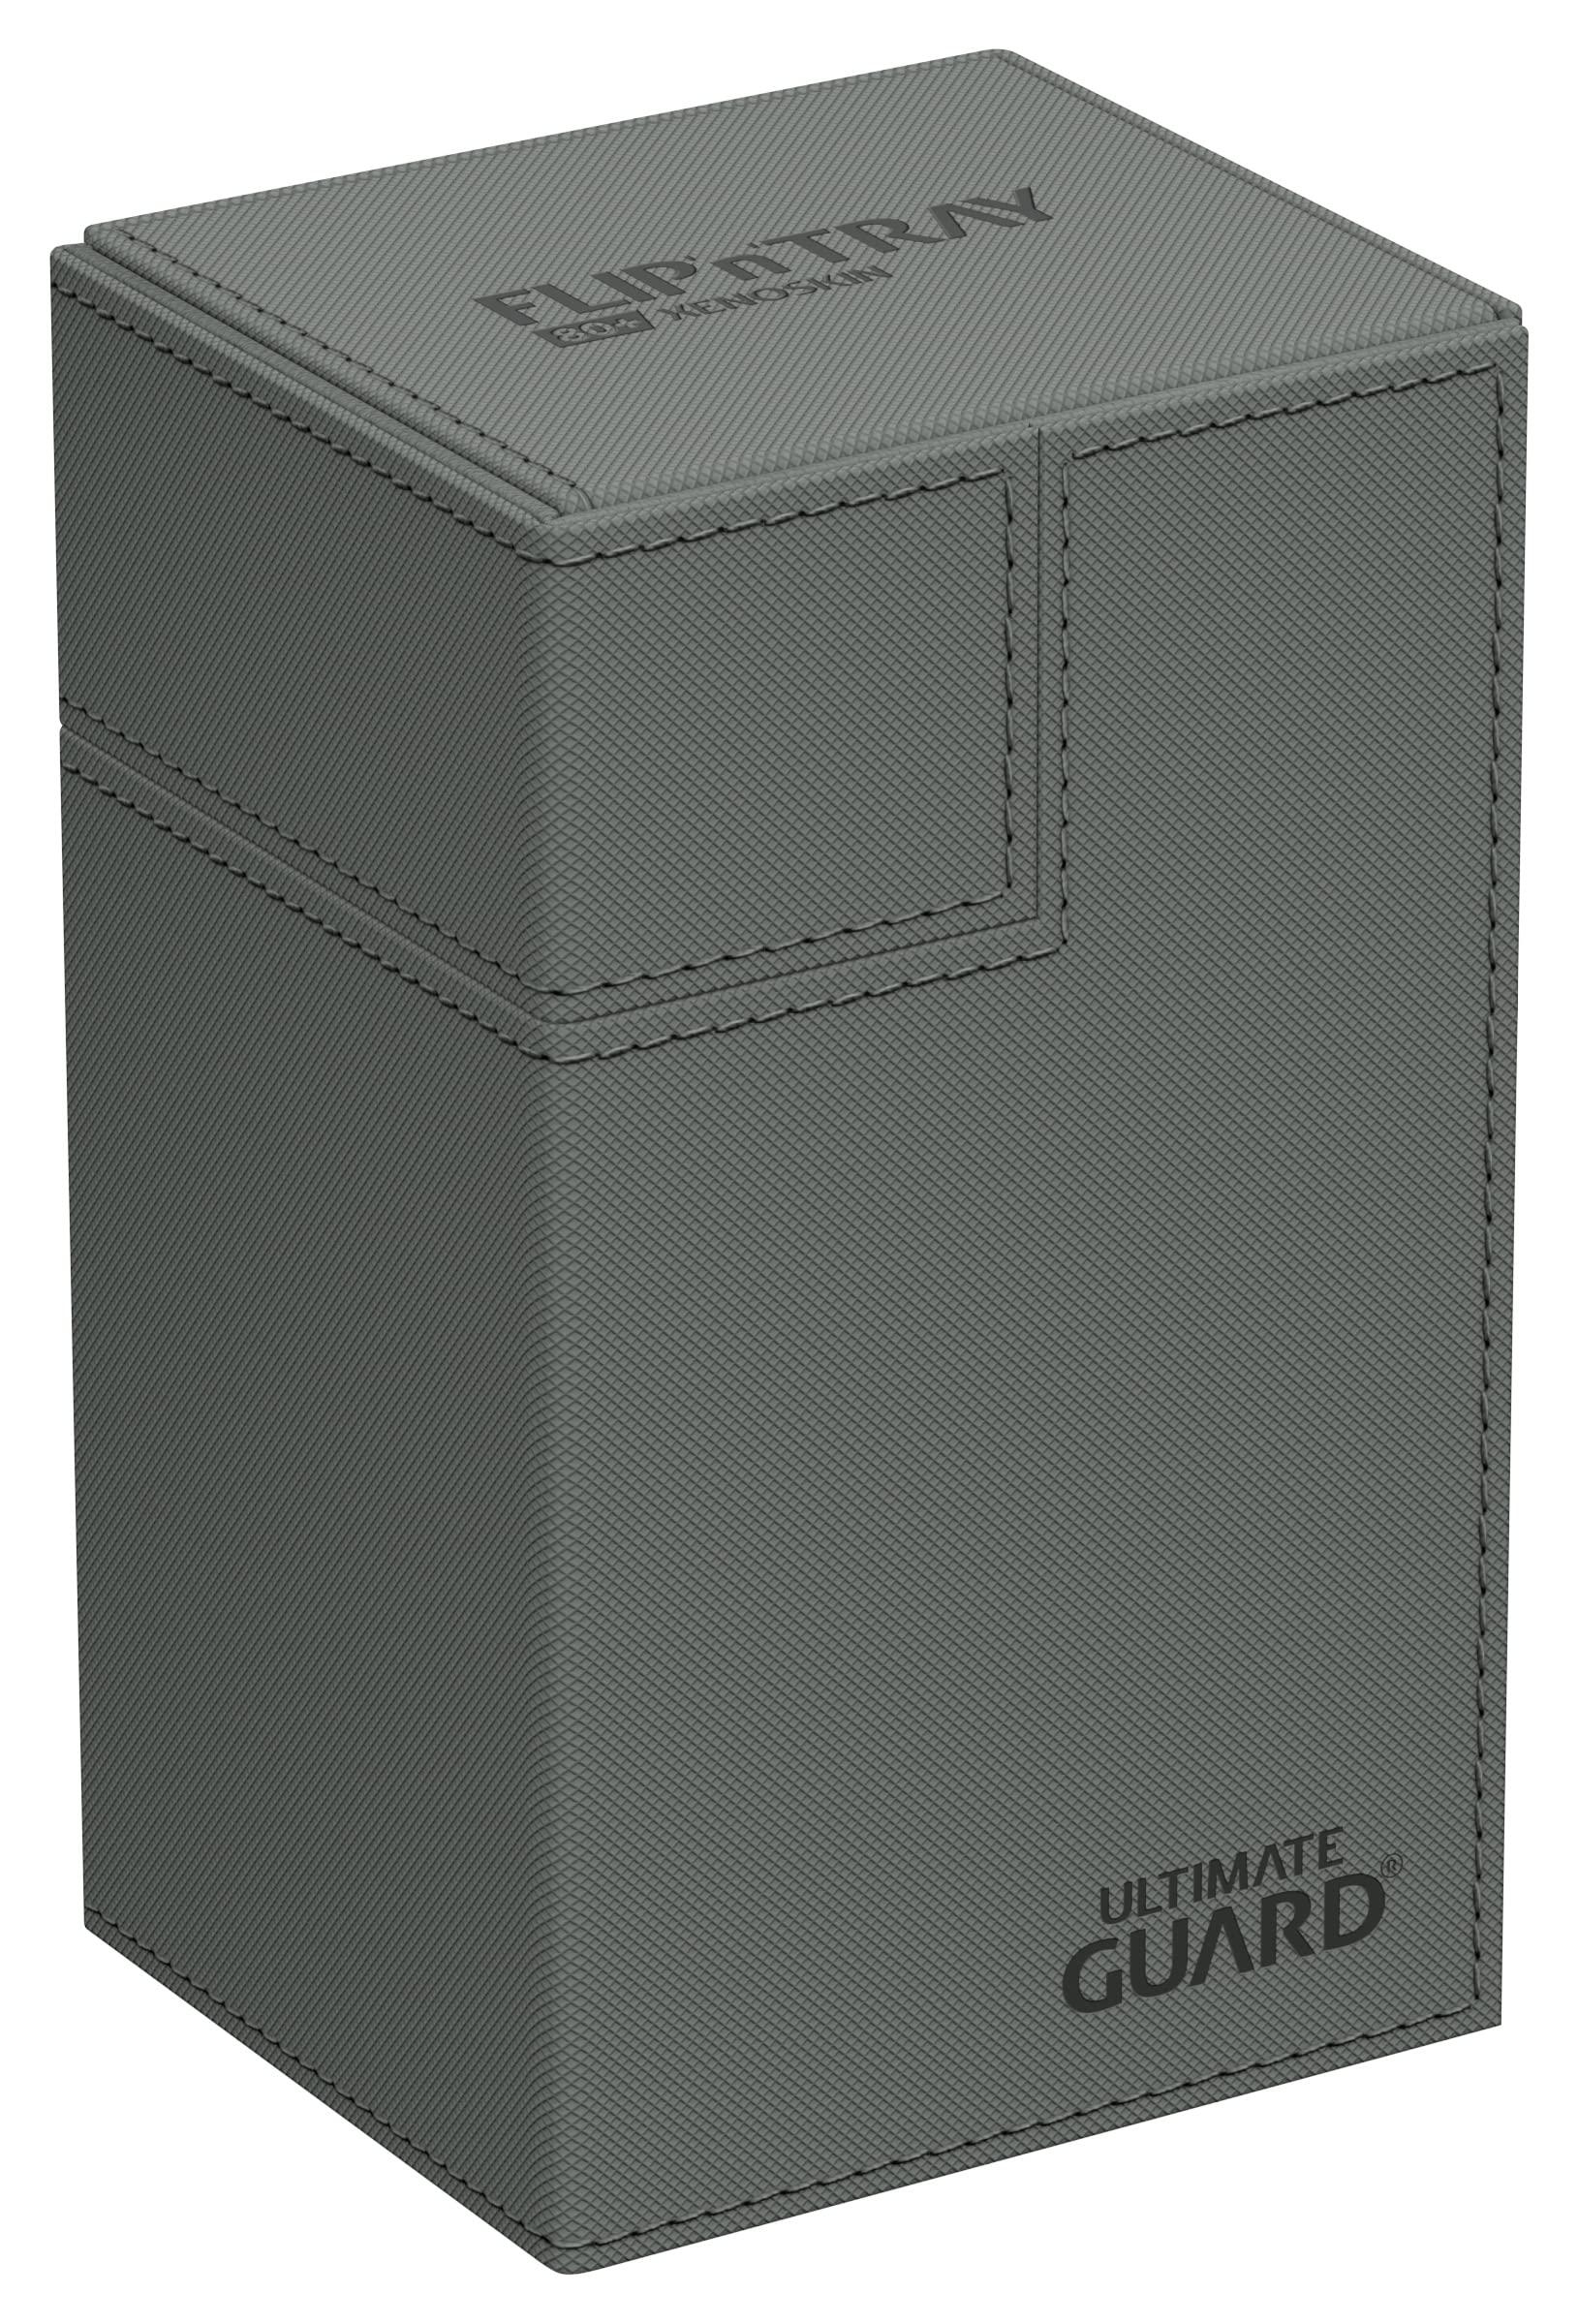 ultimate guard flip 'n' tray 80+, deck case for 80 double-sleeved tcg cards + dice tray, grey, independent magnetic closure &